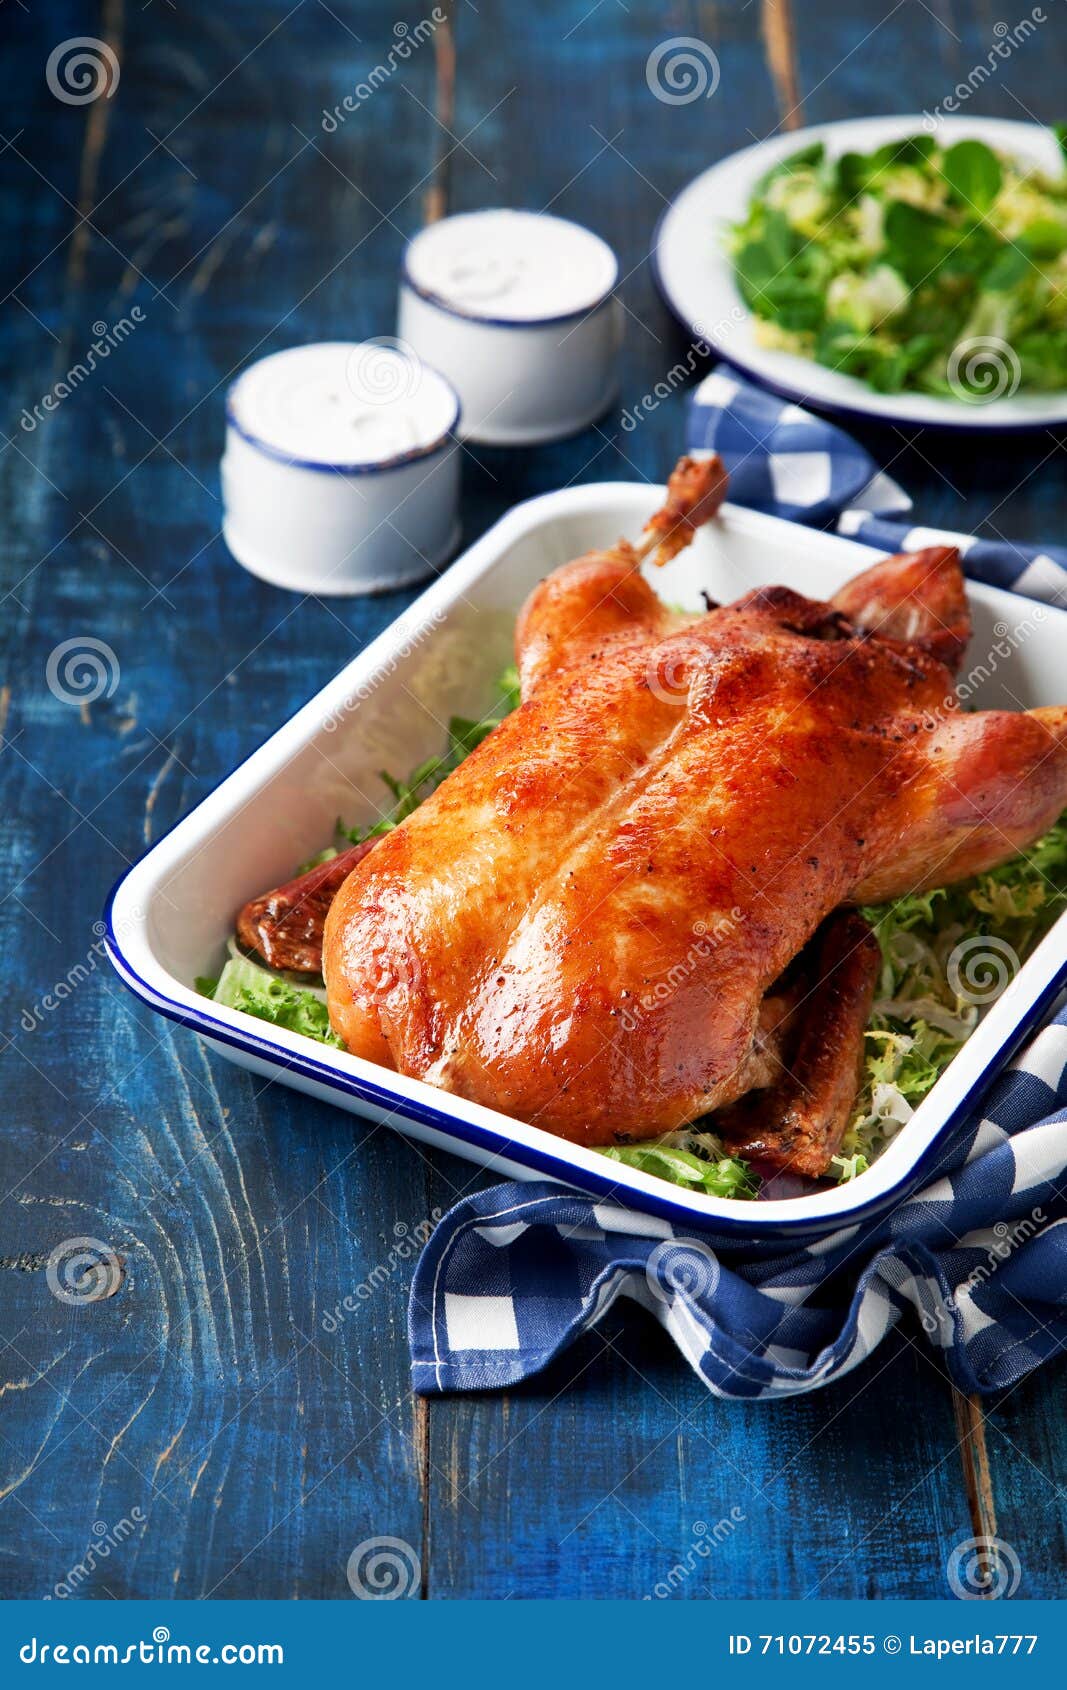 Roast duck stock image. Image of meal, cooked, close - 71072455